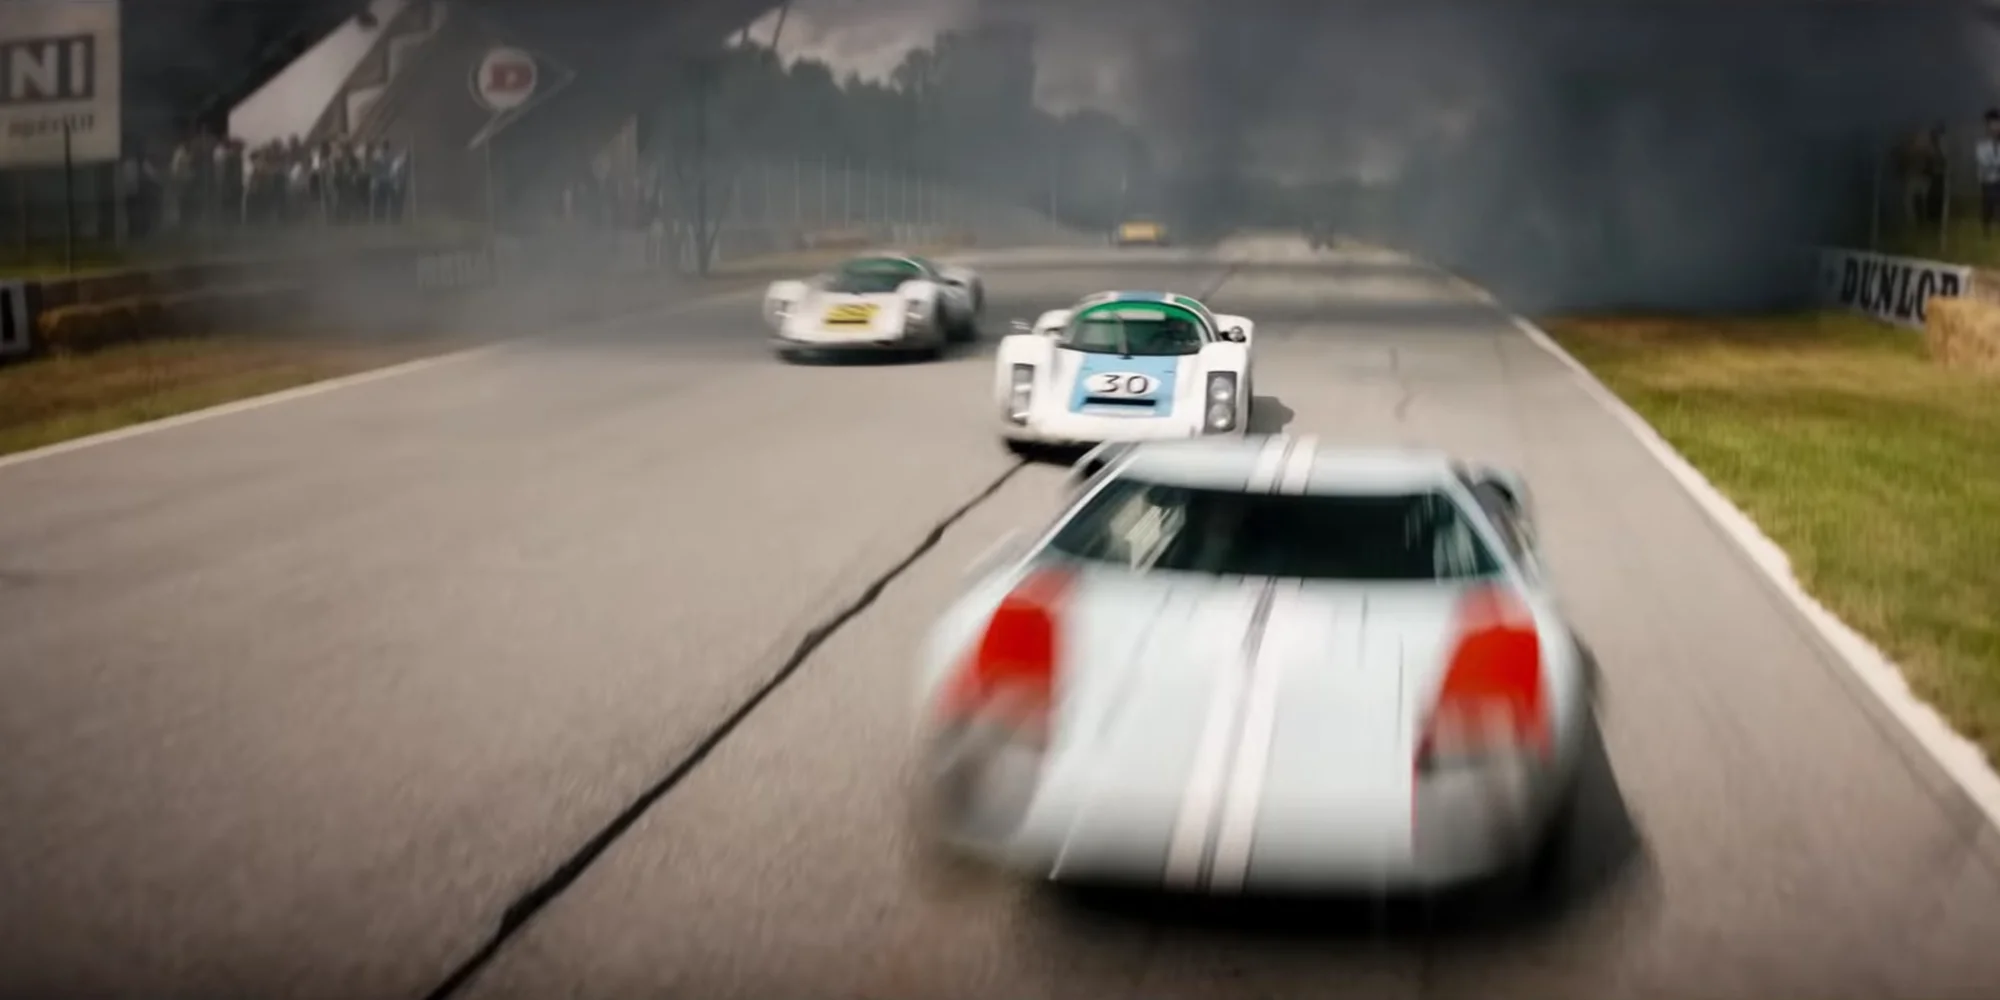 Which is the better racing movie, Ford vs. Ferrari, or Cars? - Quora